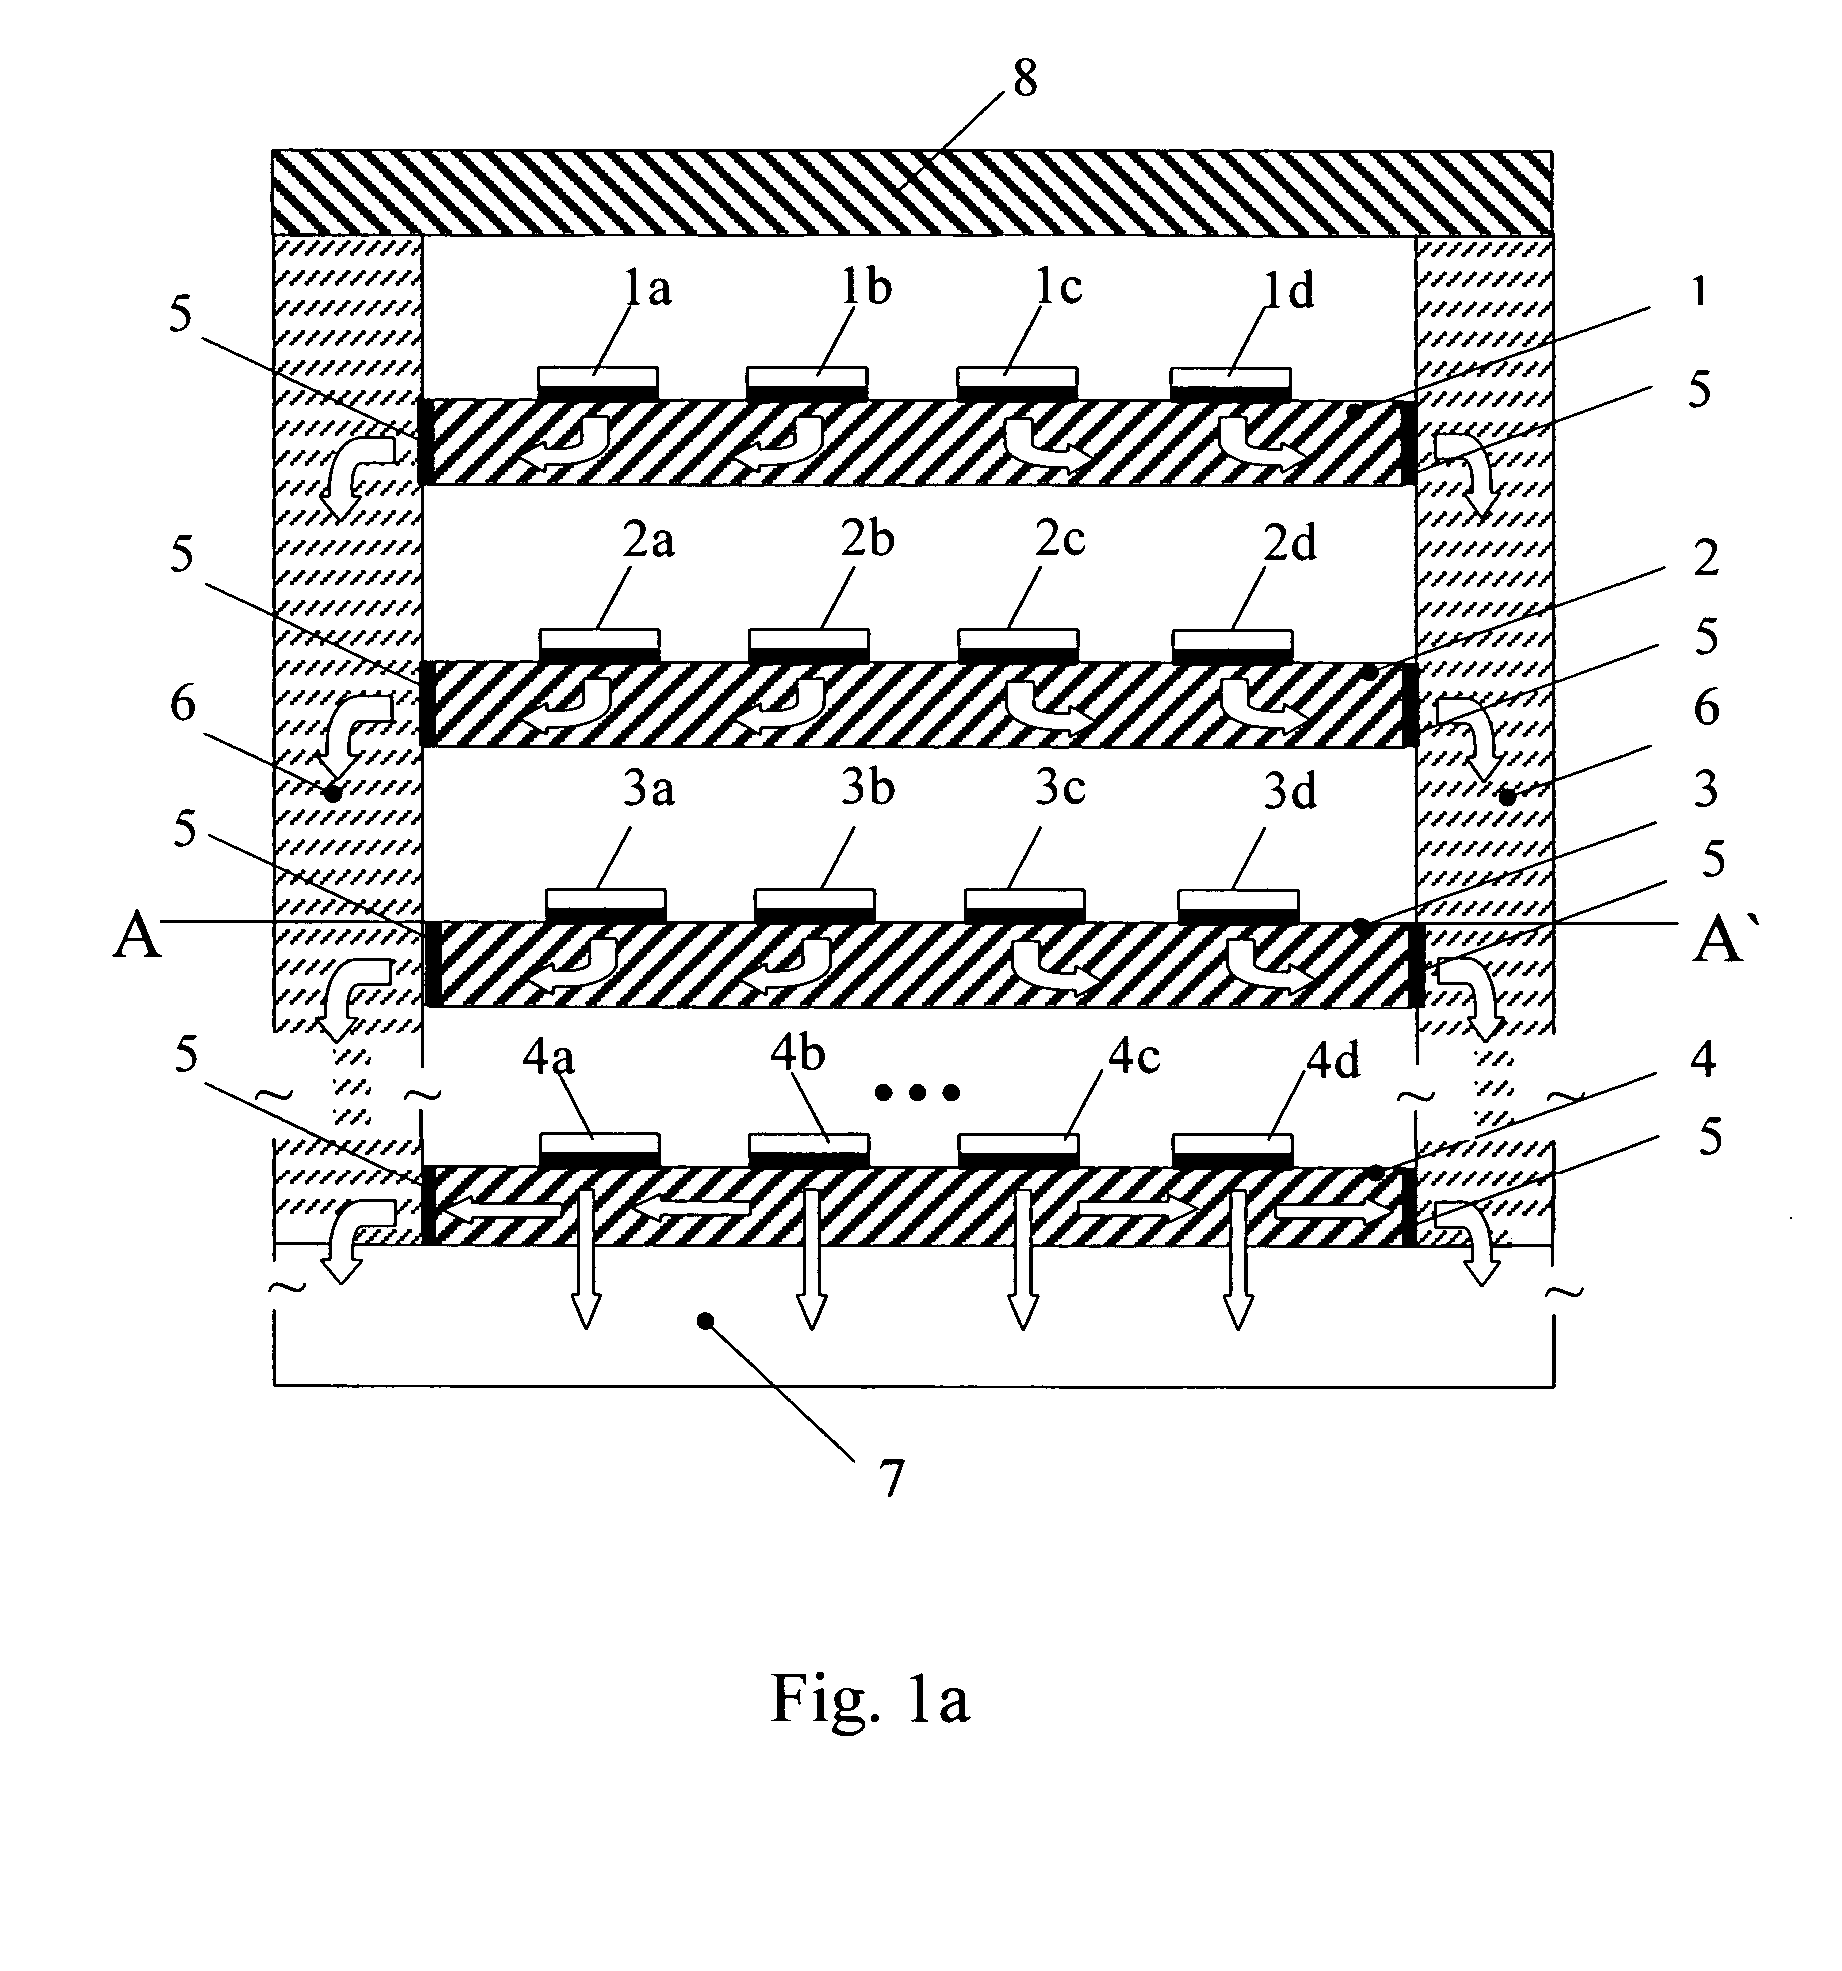 Three-dimensional integrated circuit with integrated heat sinks